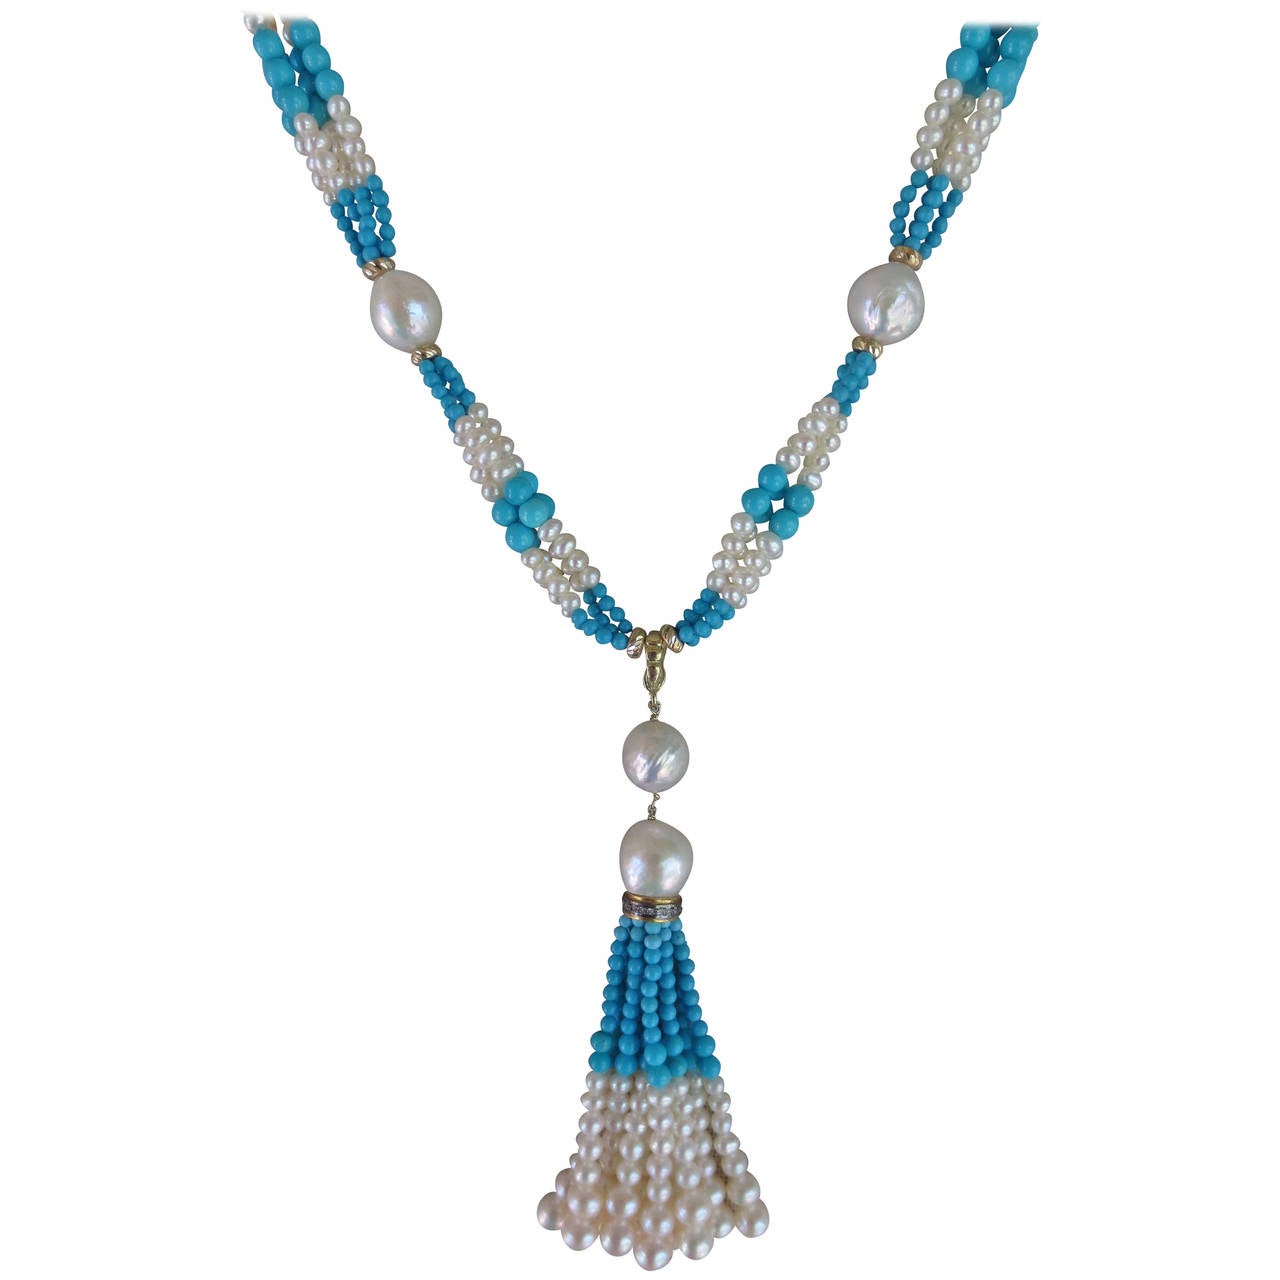 This elegant sautoir features slightly graduated white pearl and turquoise bead clusters between luxurious pearls, accented with 14k yellow gold beads and clasp. Each pearl is centered between 14 k yellow gold roundels. The 3-inch tassel hangs from